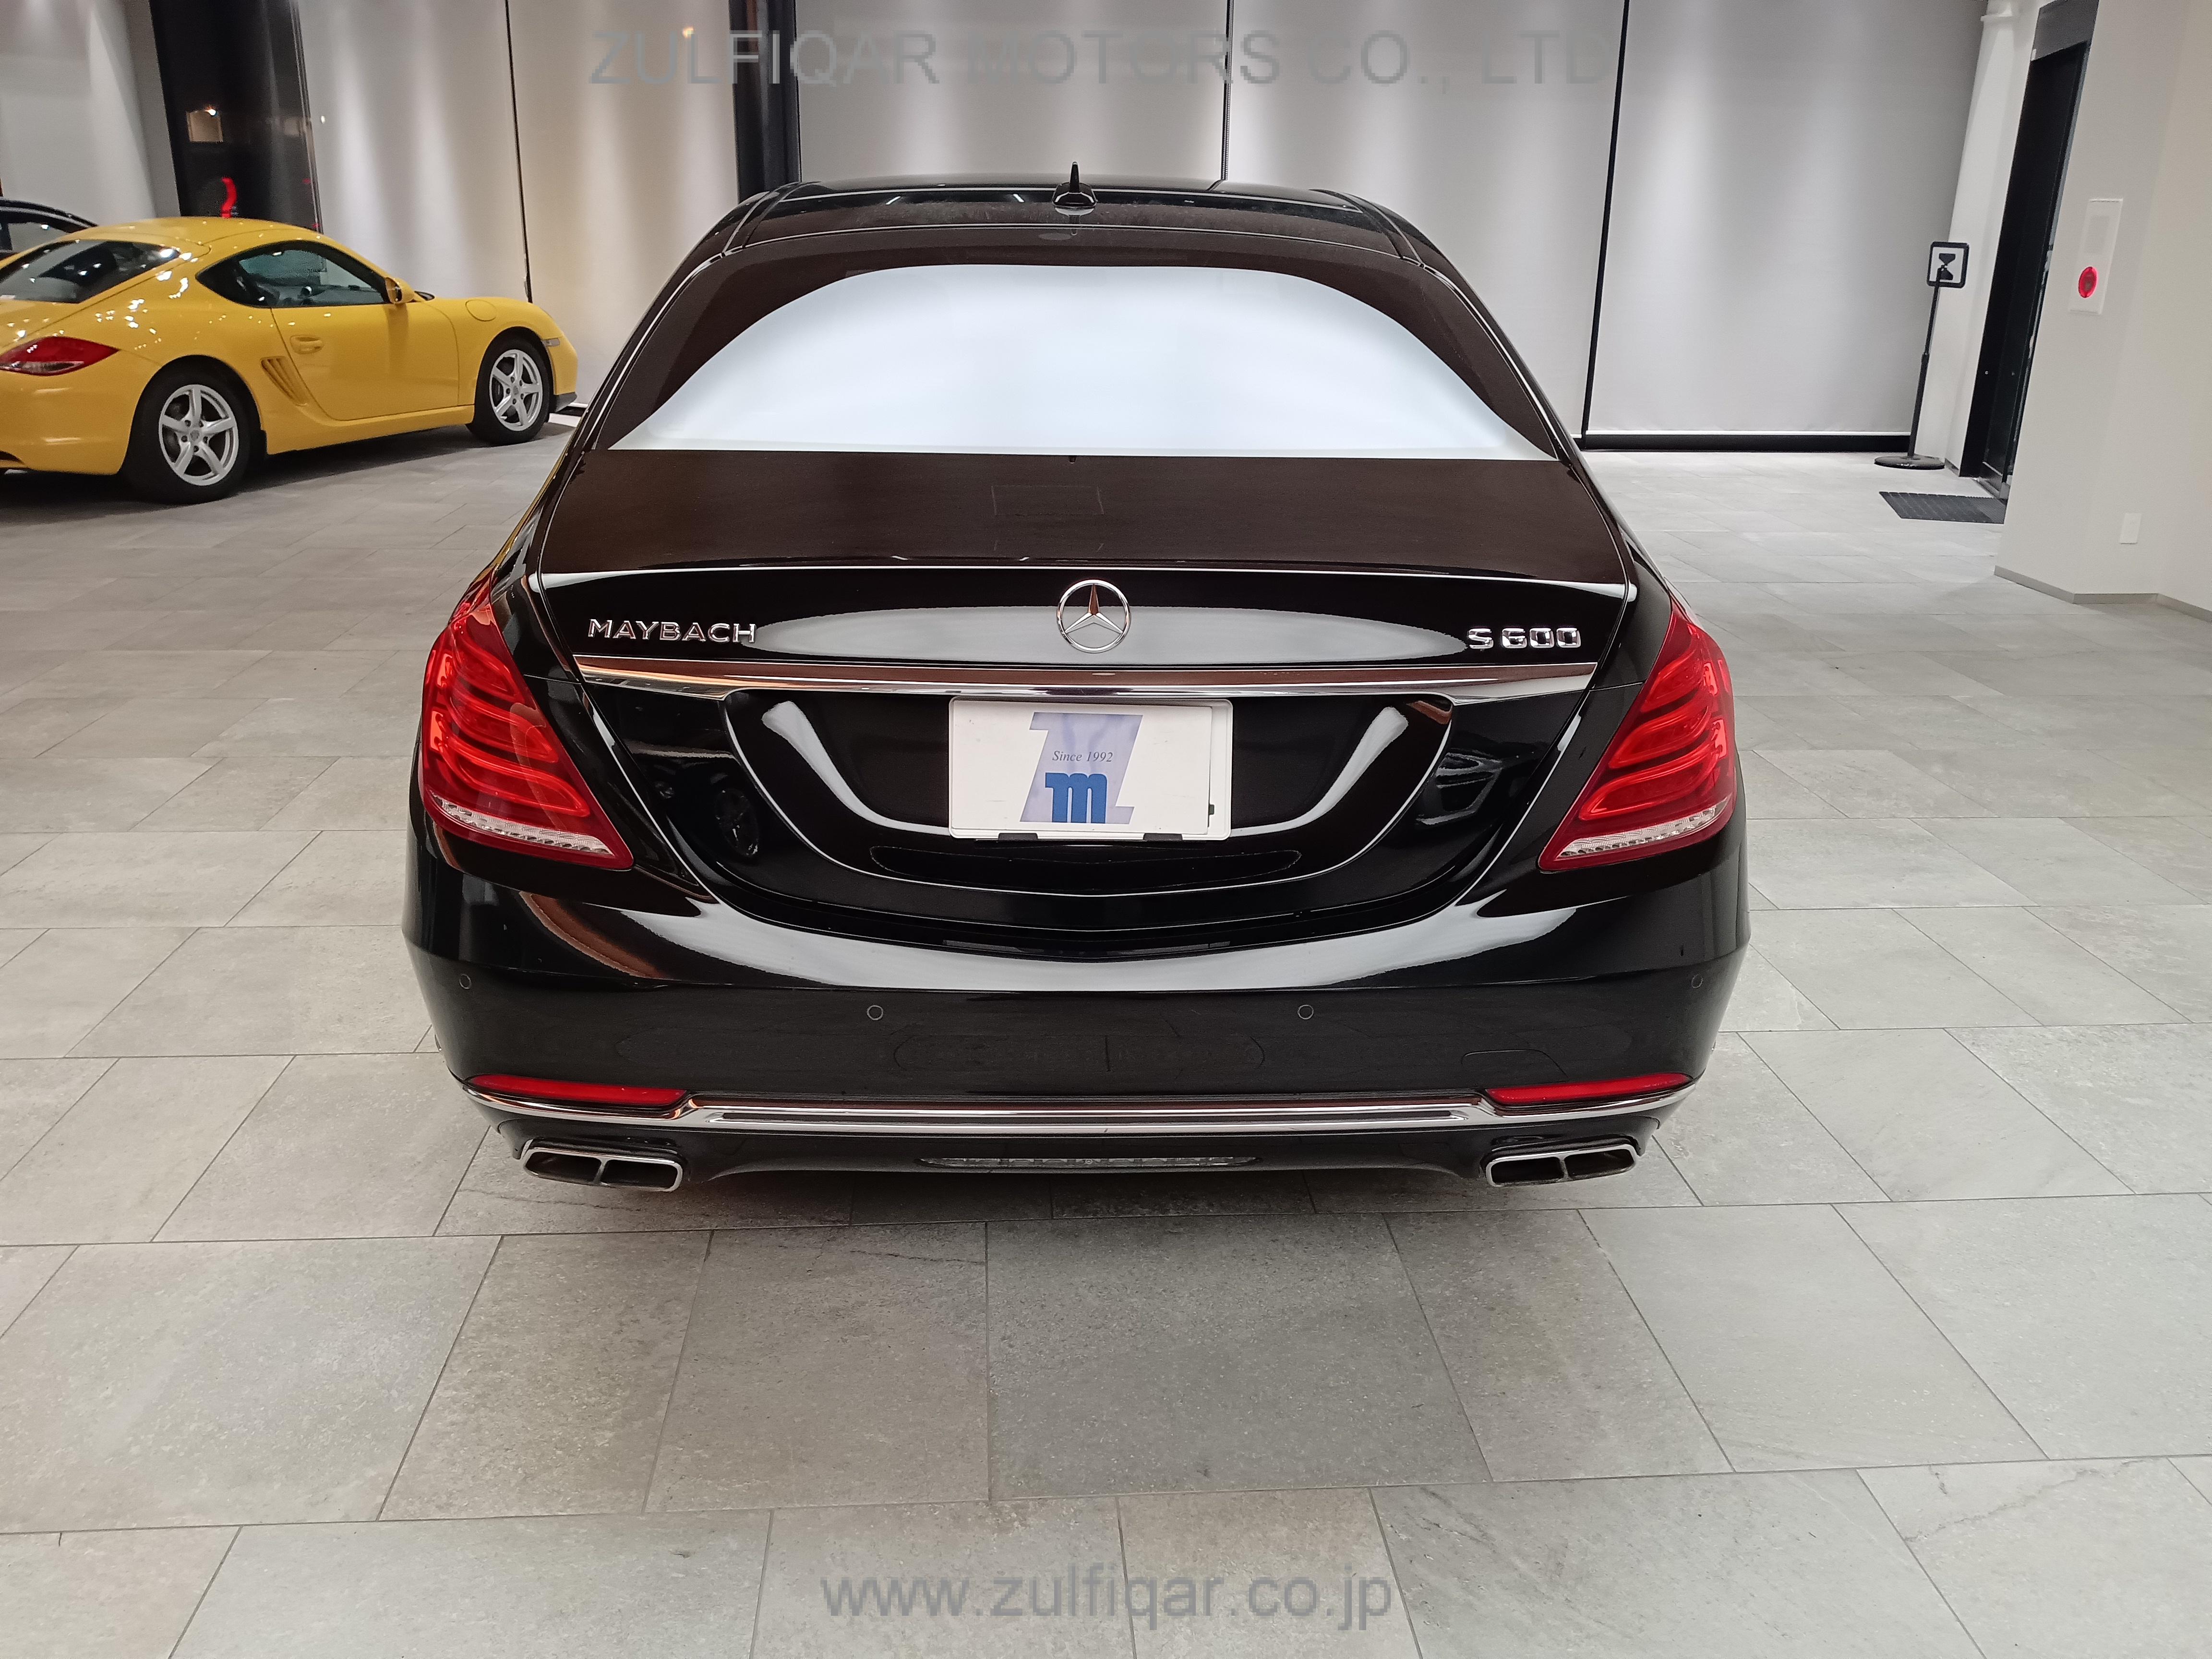 MERCEDES MAYBACH S CLASS 2015 Image 8